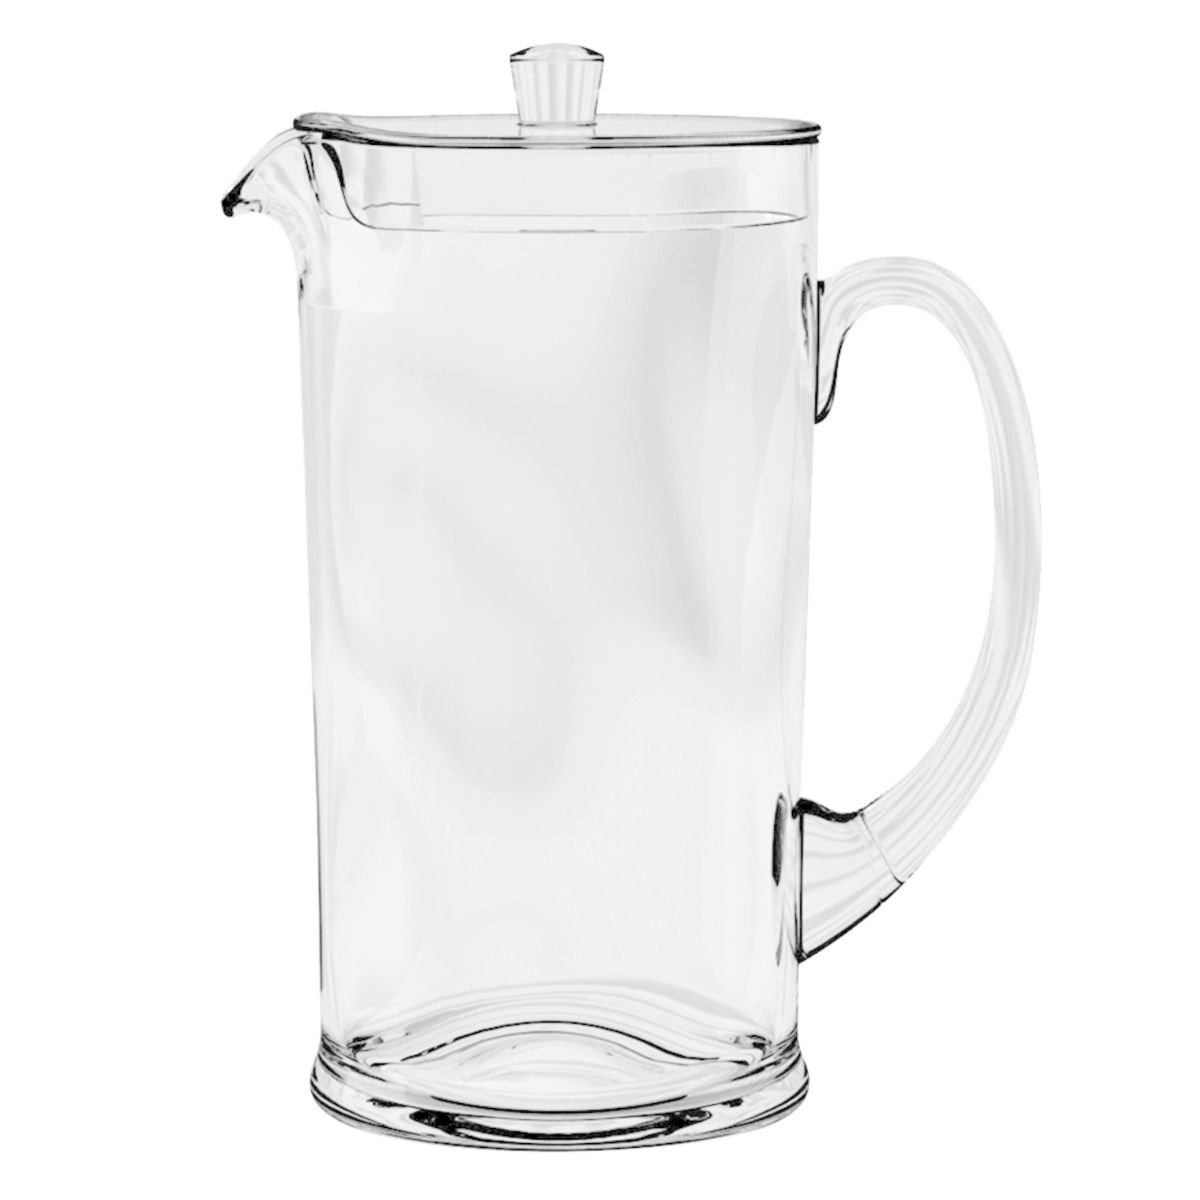 Cordoba 2.3L Pitcher with Lid - Clear, TarHong